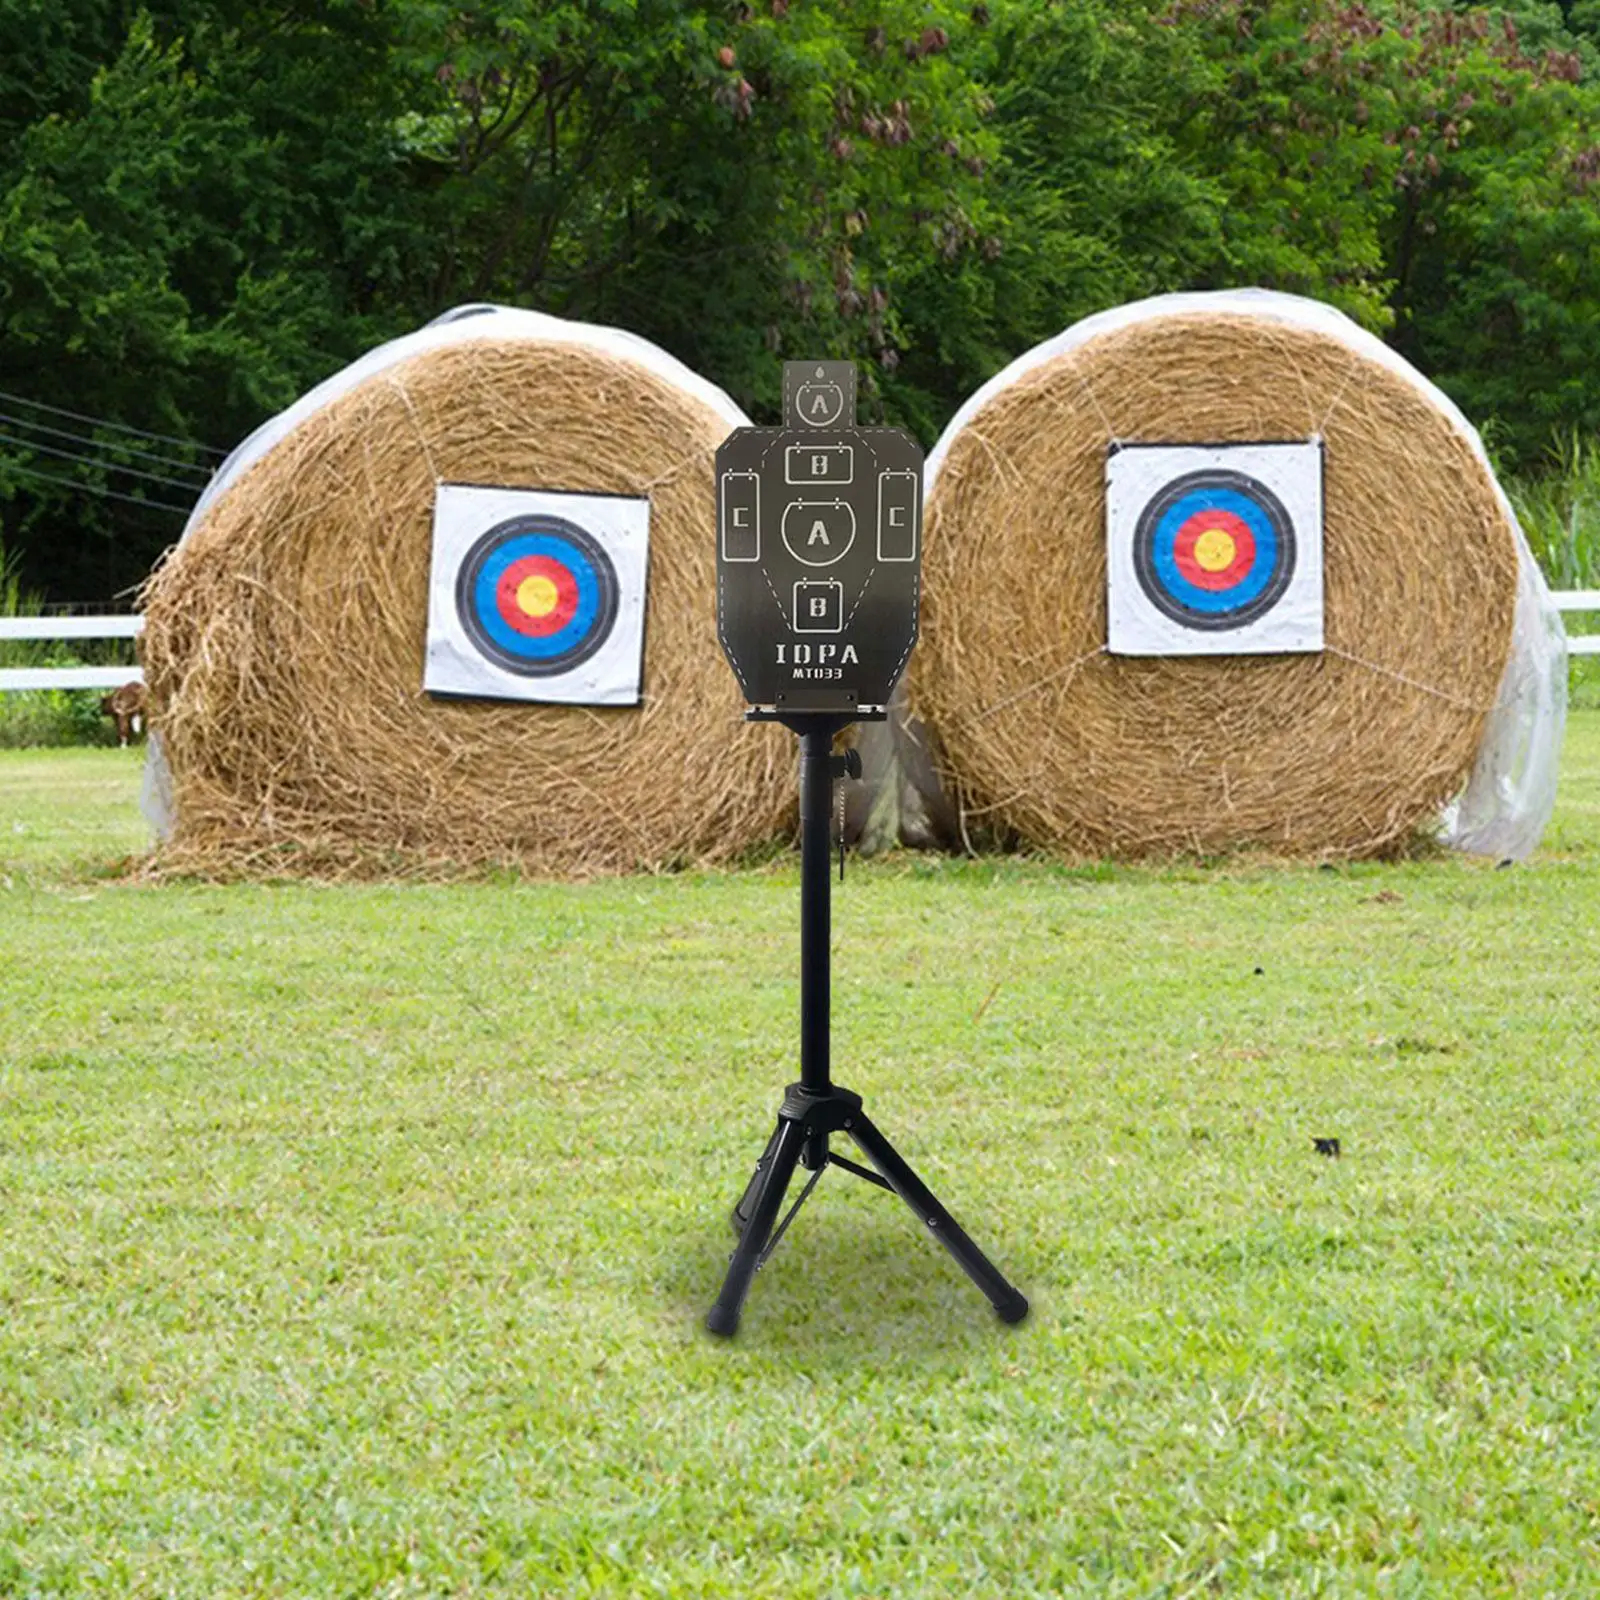 Silhouette Target Hunting Hunting Training Catapults Sturdy Hunting Practice Stainless Steel Hunting Silhouette Target